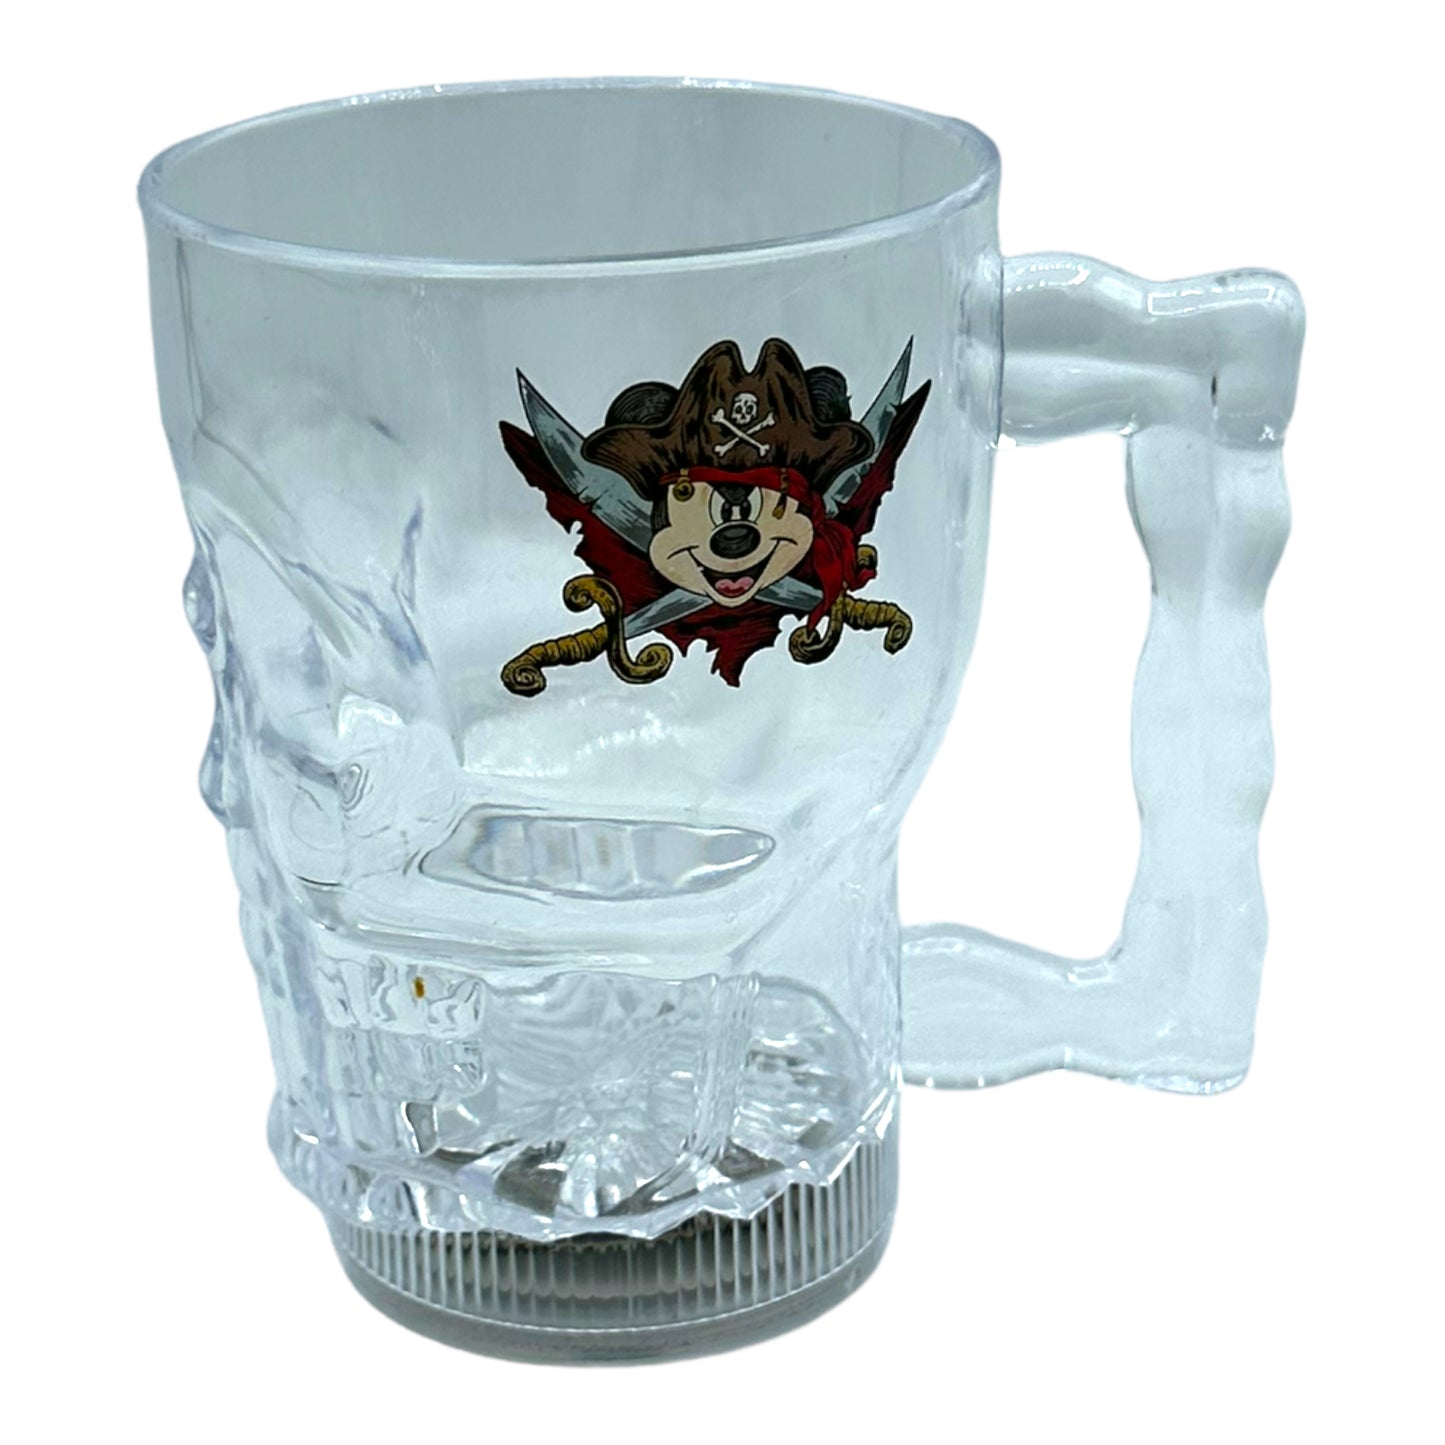 Mickey Mouse Pirates Skull Light-Up Cup - Disney Cruise Line